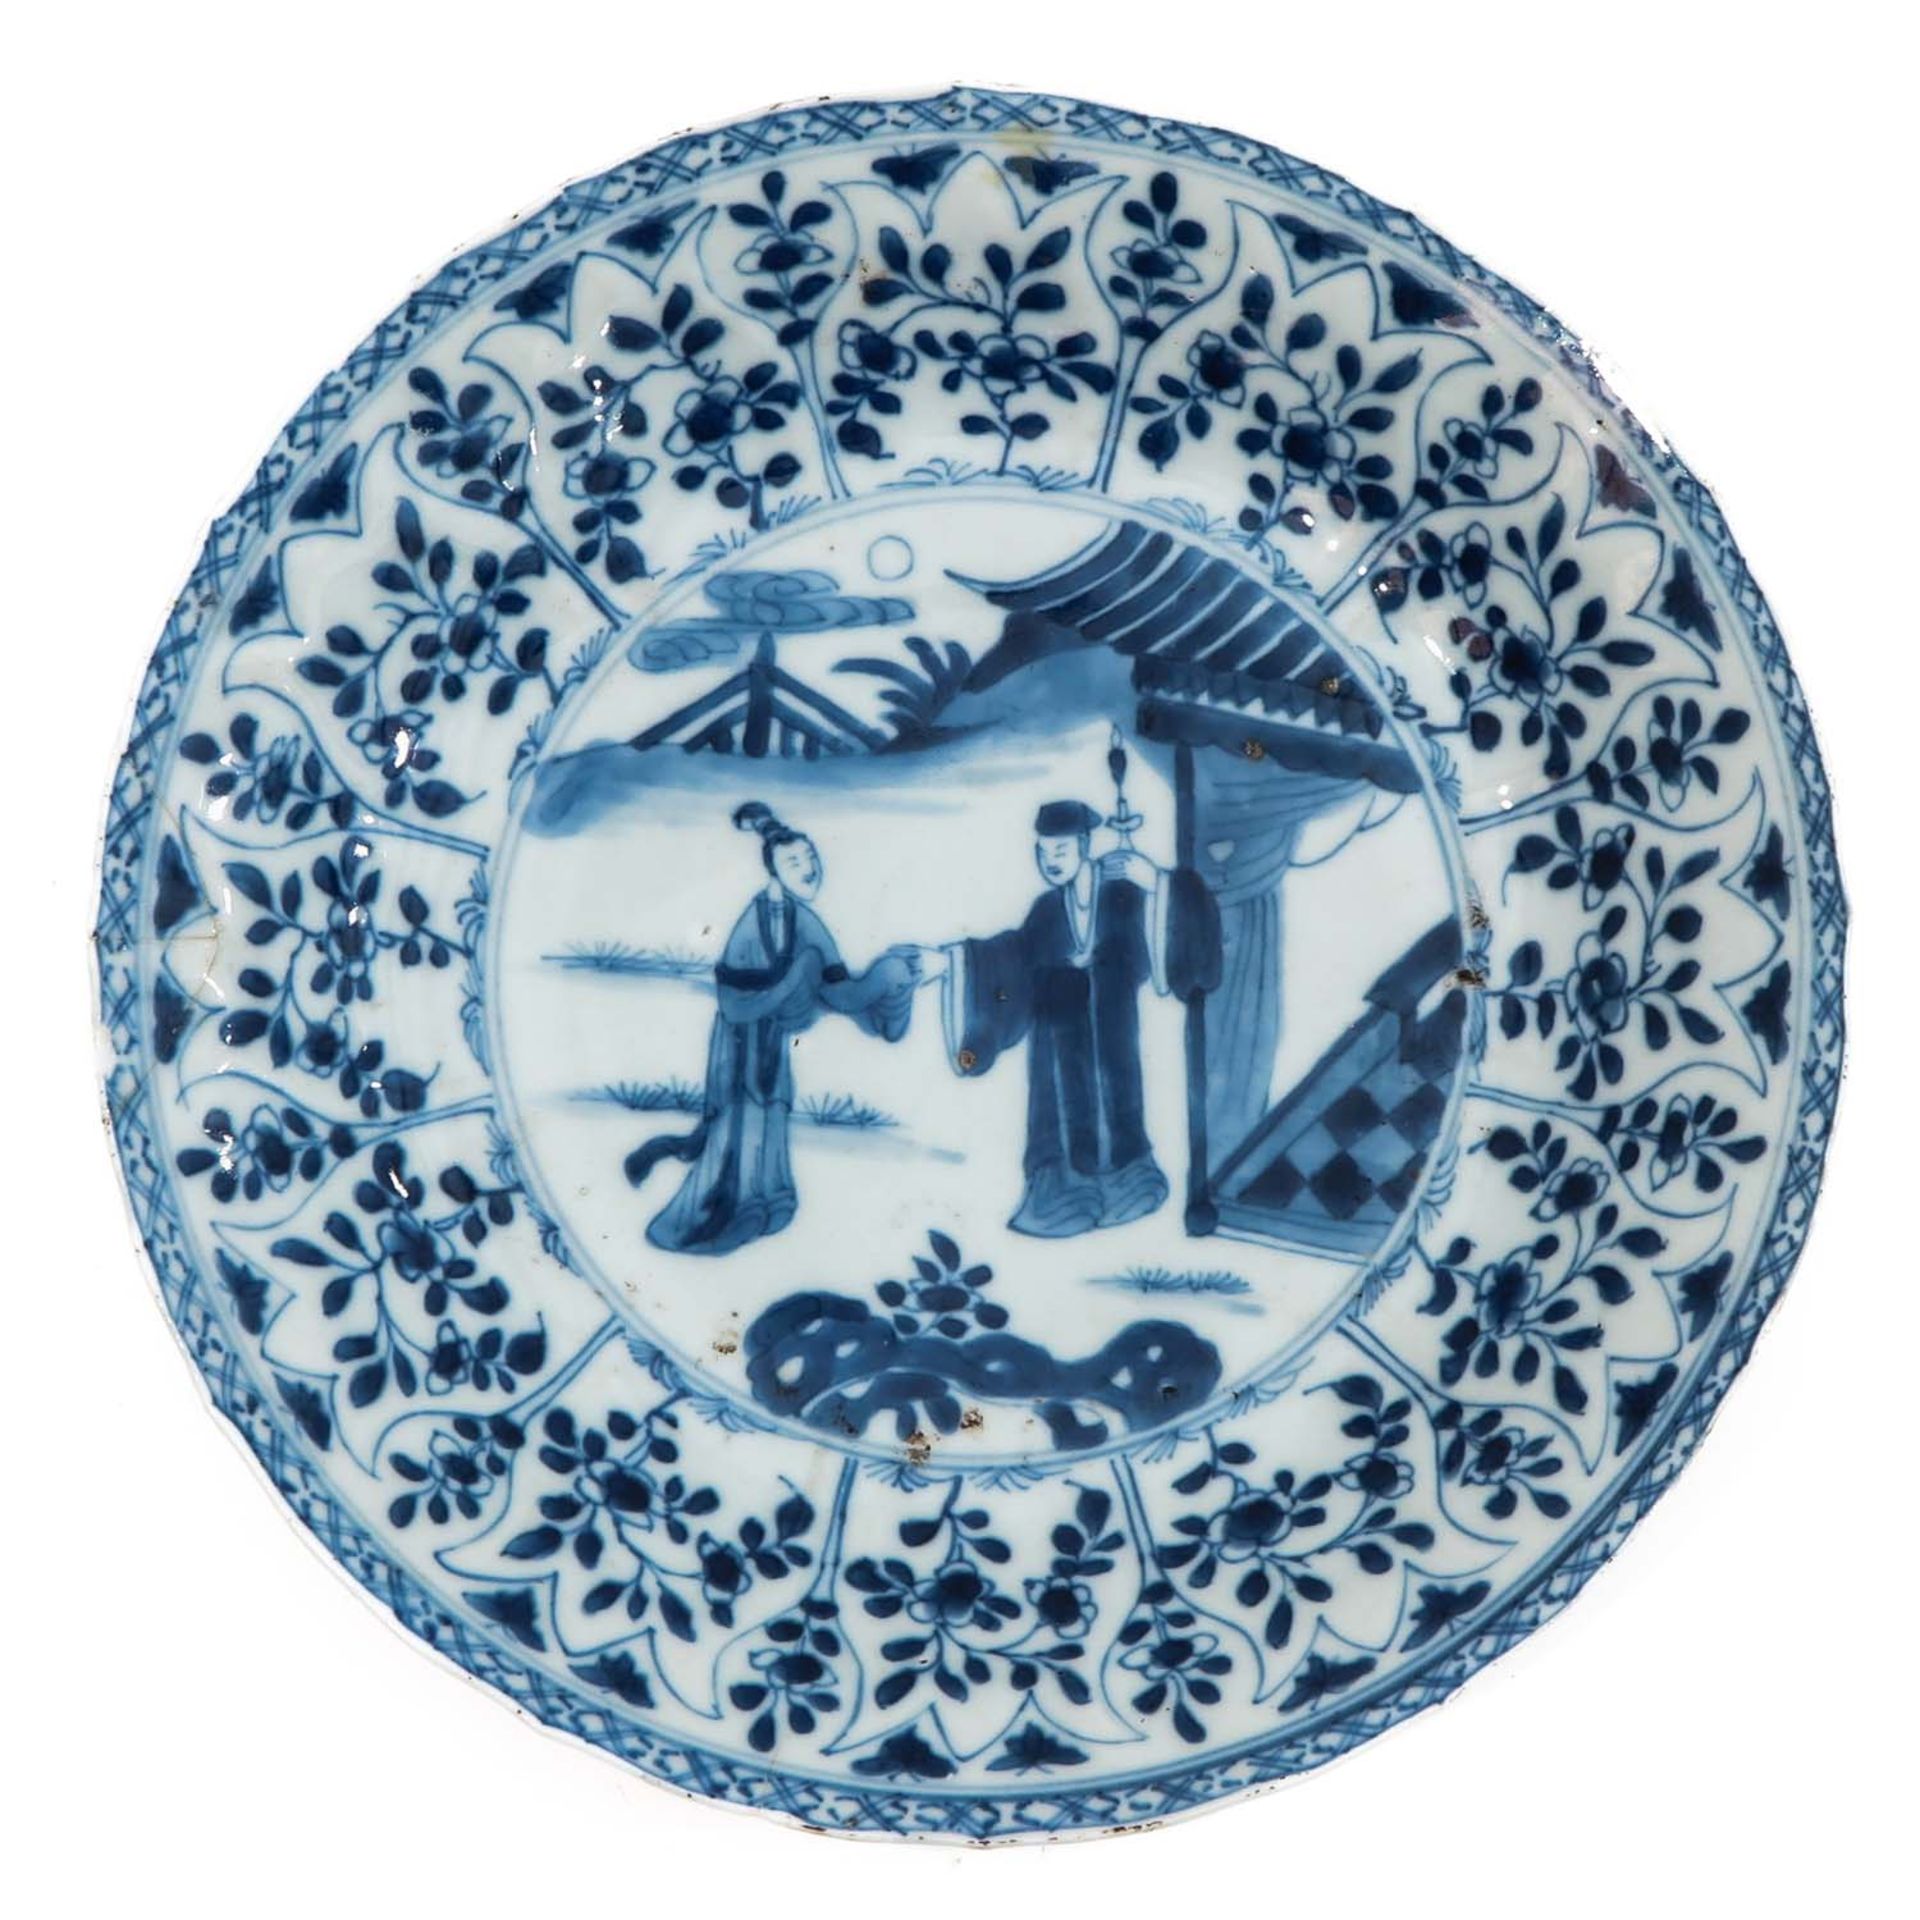 A Collection of 3 Blue and White Plates - Image 3 of 10